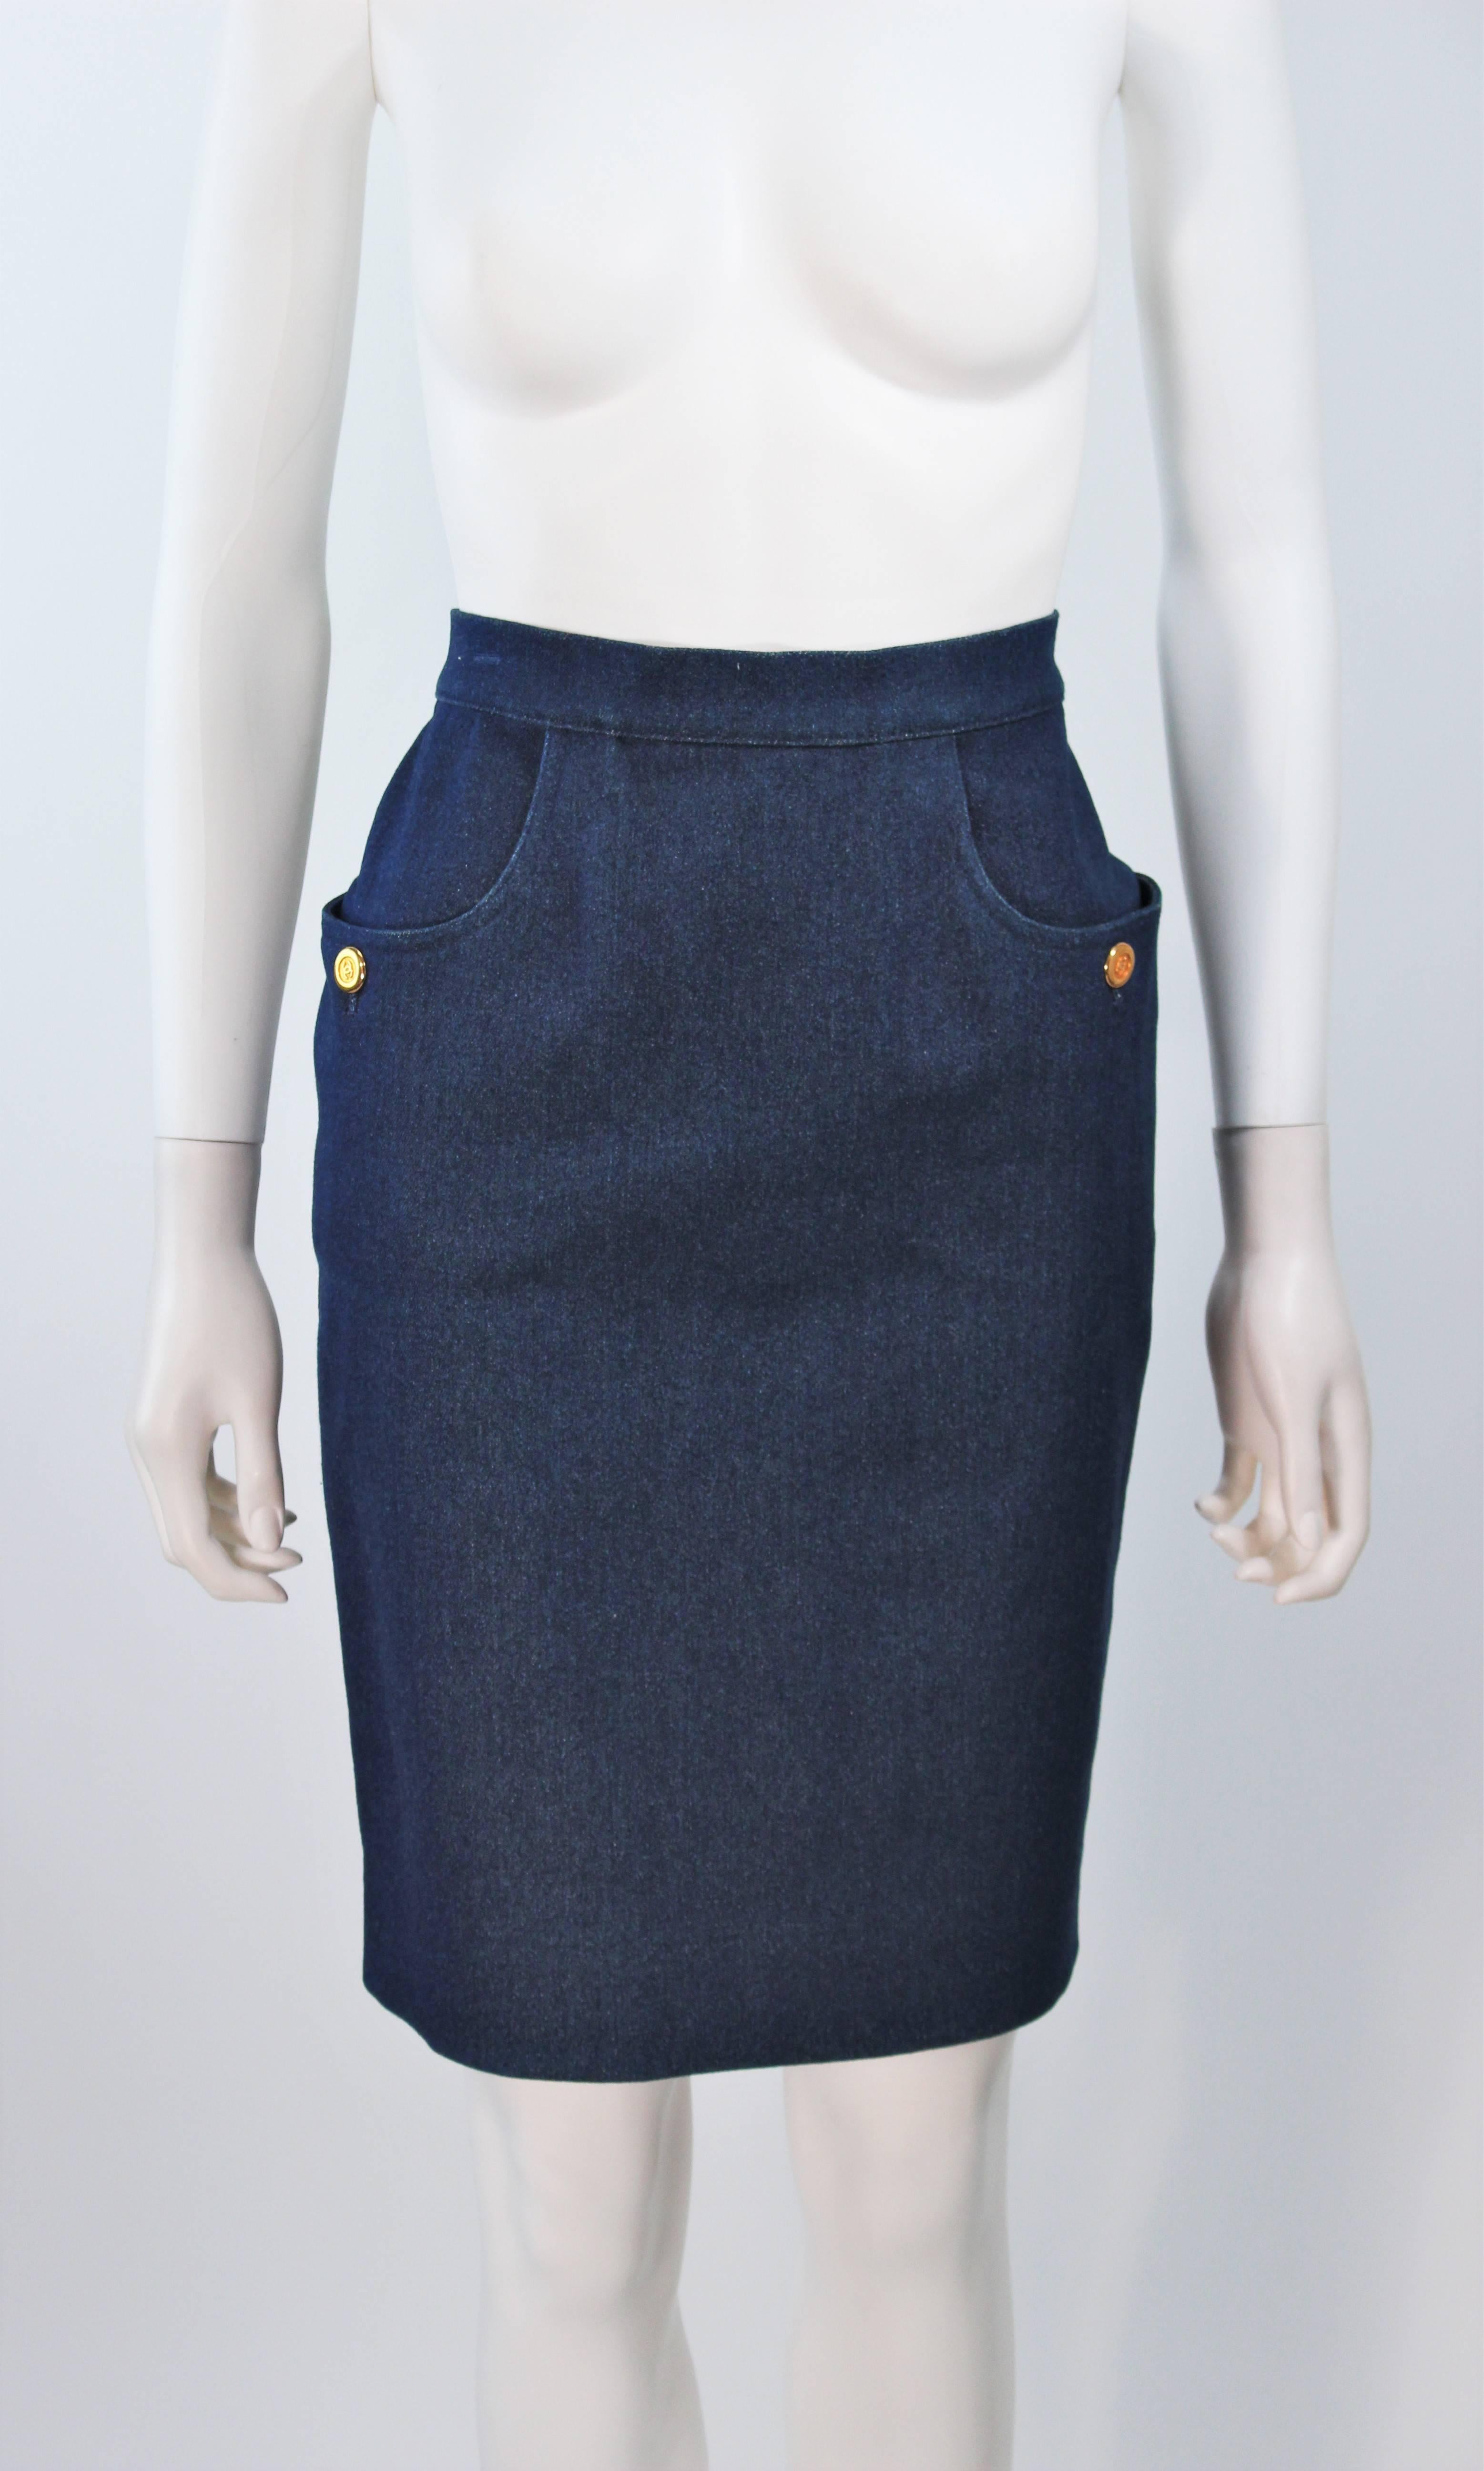 Black CHANEL Stretch Denim Skirt with Buttons Size 6